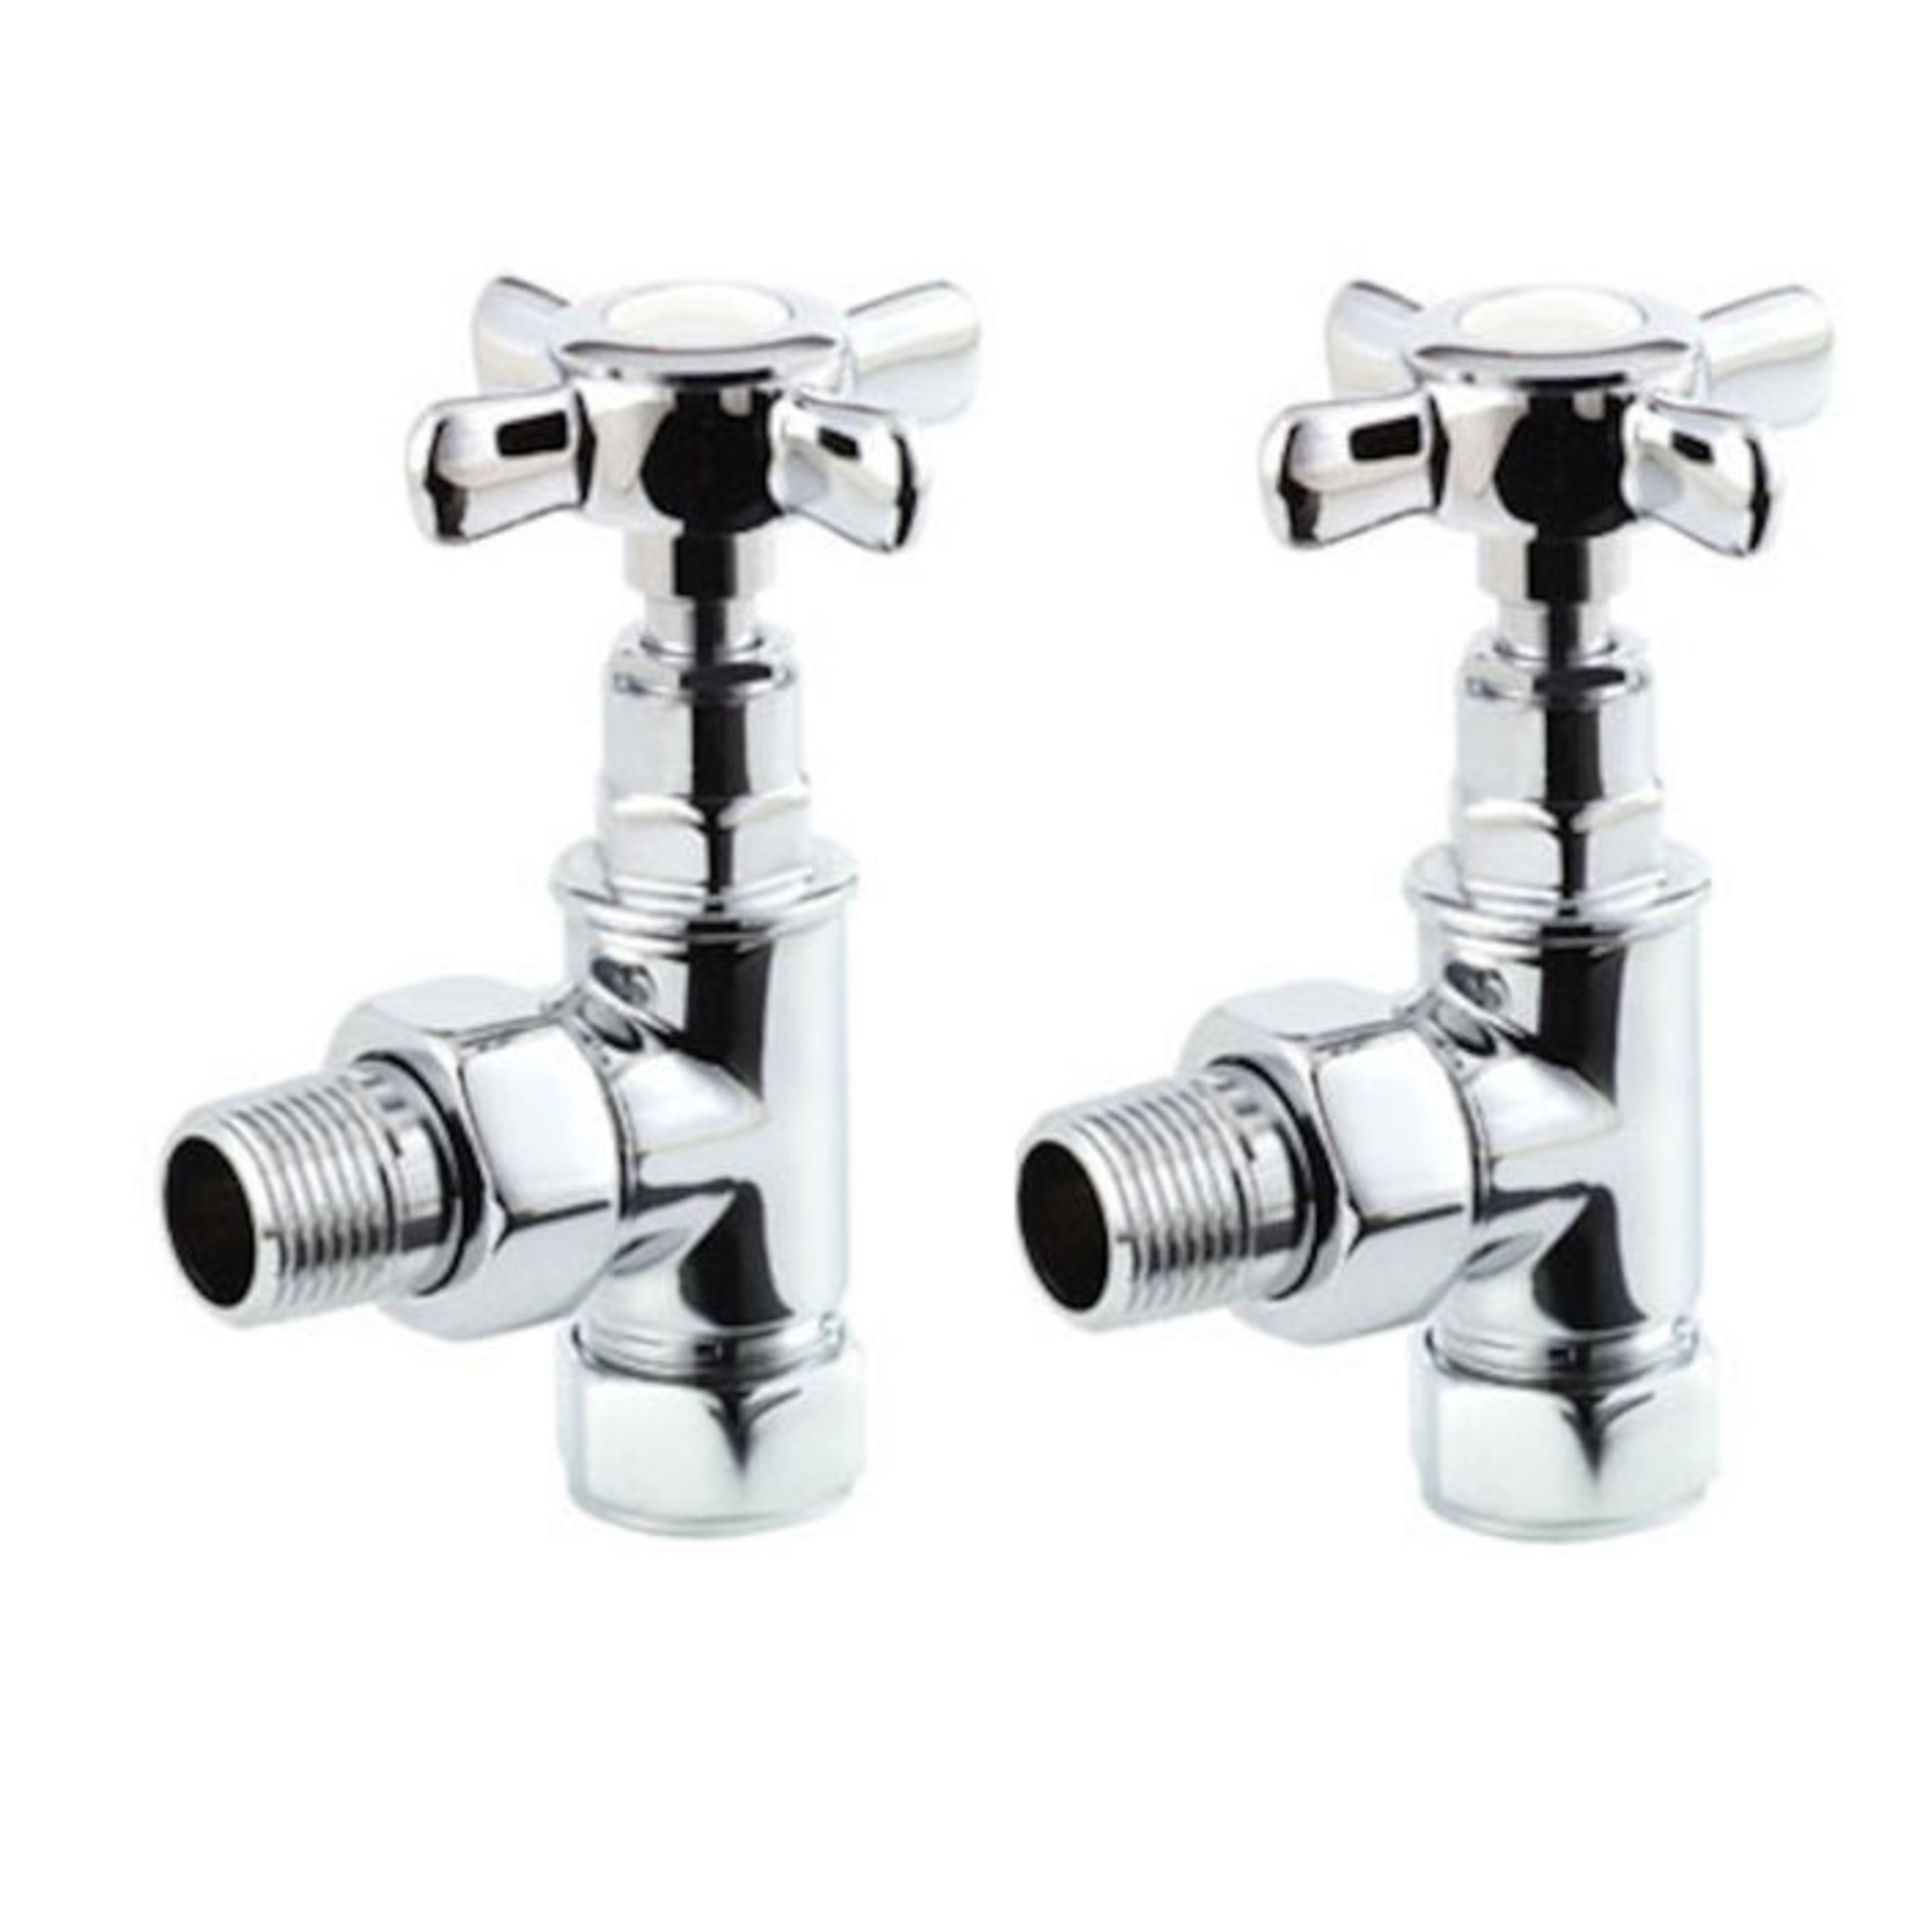 (ZZ64) 15mm Standard Connection Angled Polished Chrome Radiator Valves Chrome Plated Solid Brass